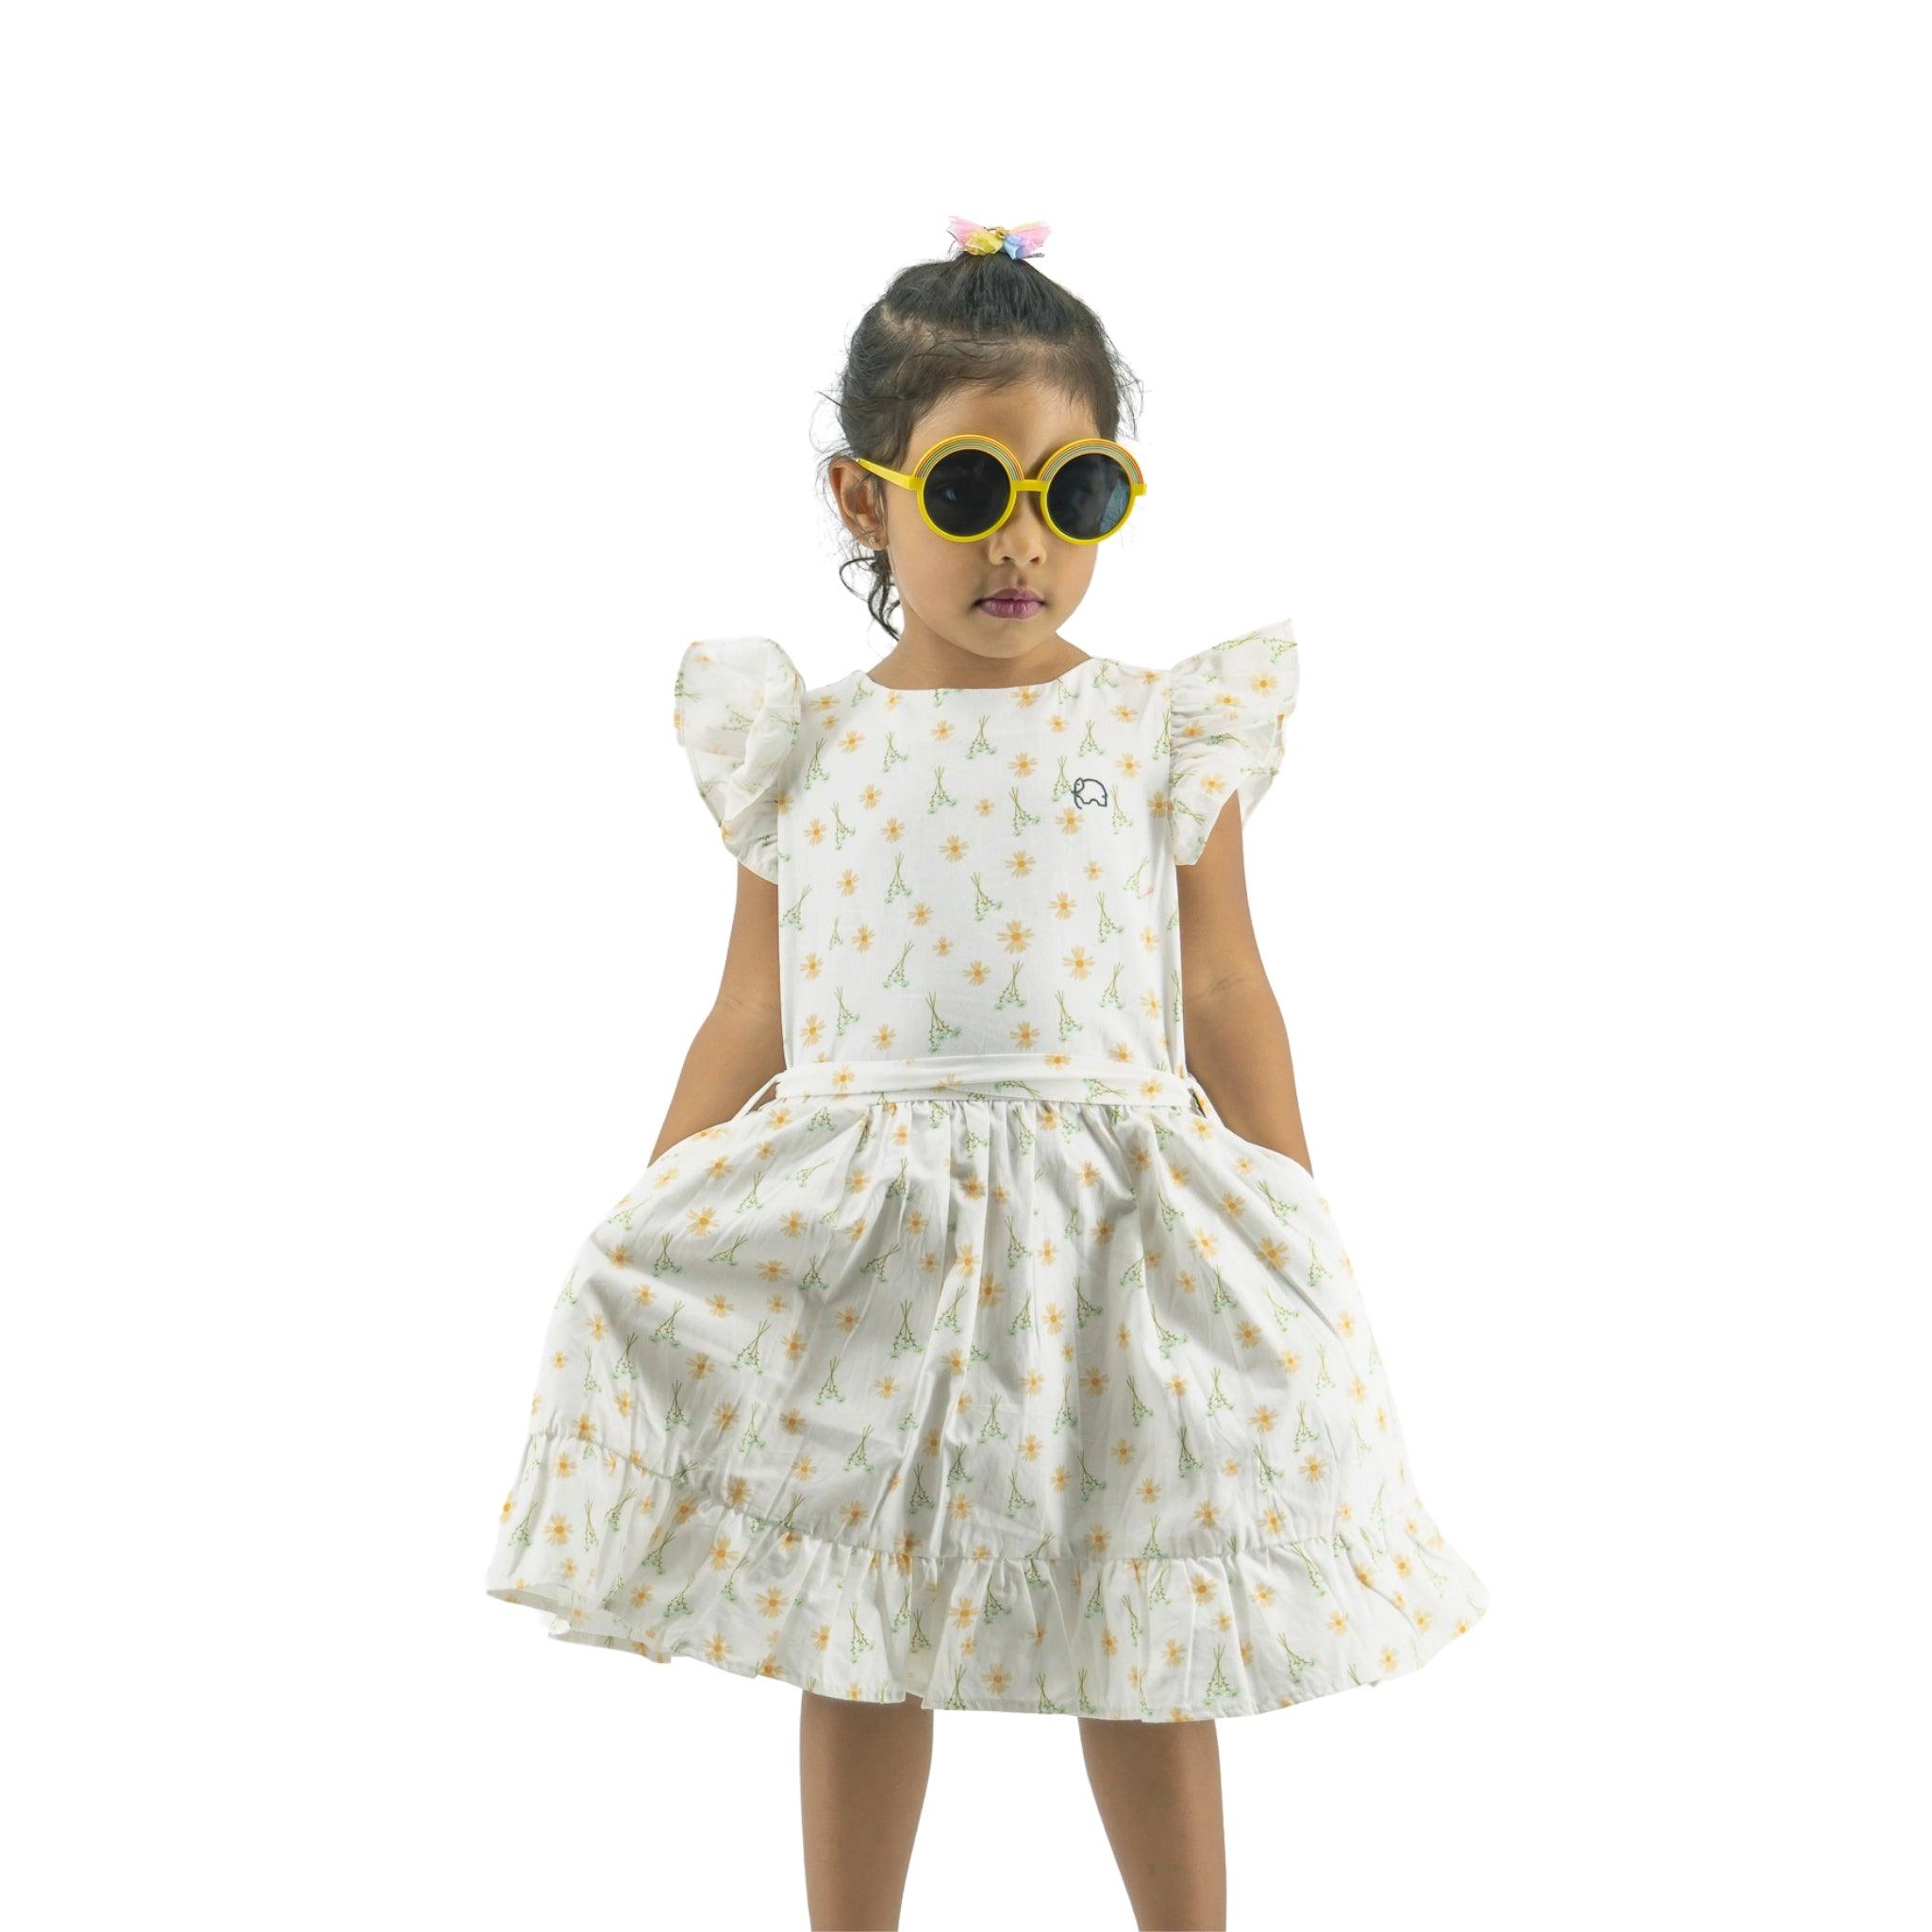 Young girl in a Karee Petite Blossom Cotton Dress in Smoked Pearl with star patterns, wearing large yellow sunglasses, standing against a white background.